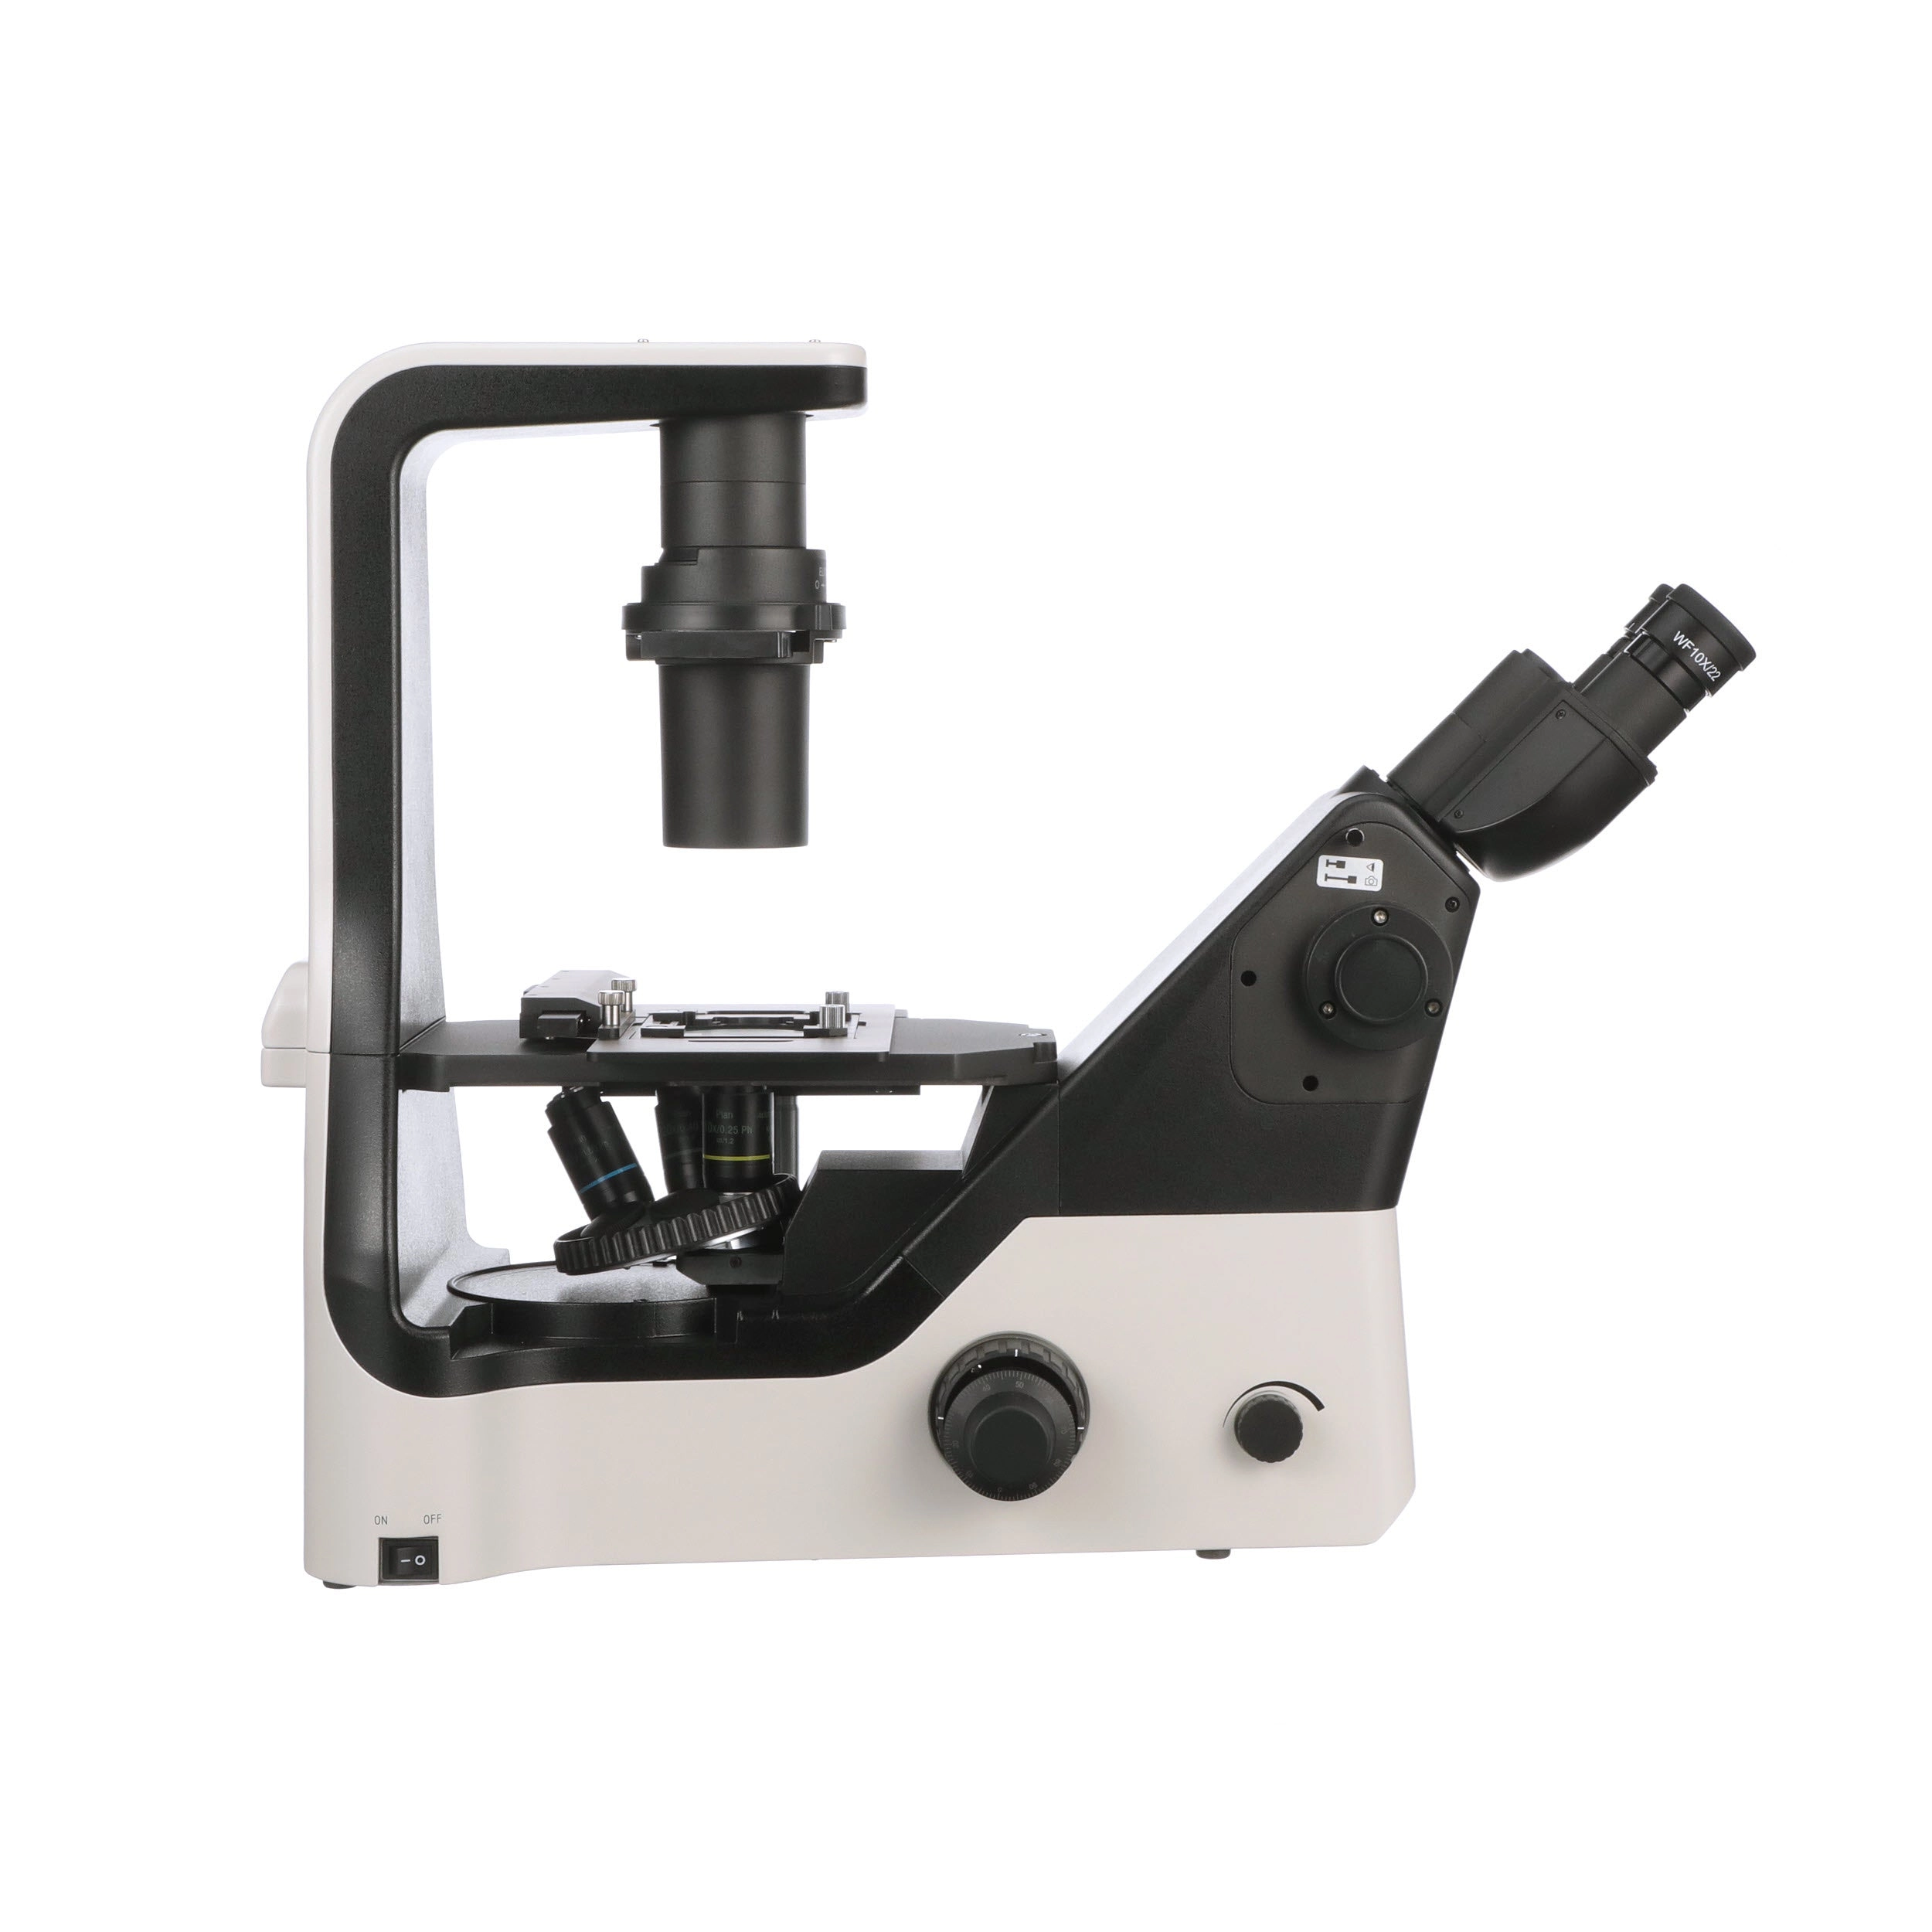 Accu-Scope EXI-410 Inverted Microscope with Phase Contrast (Tissue Culture)